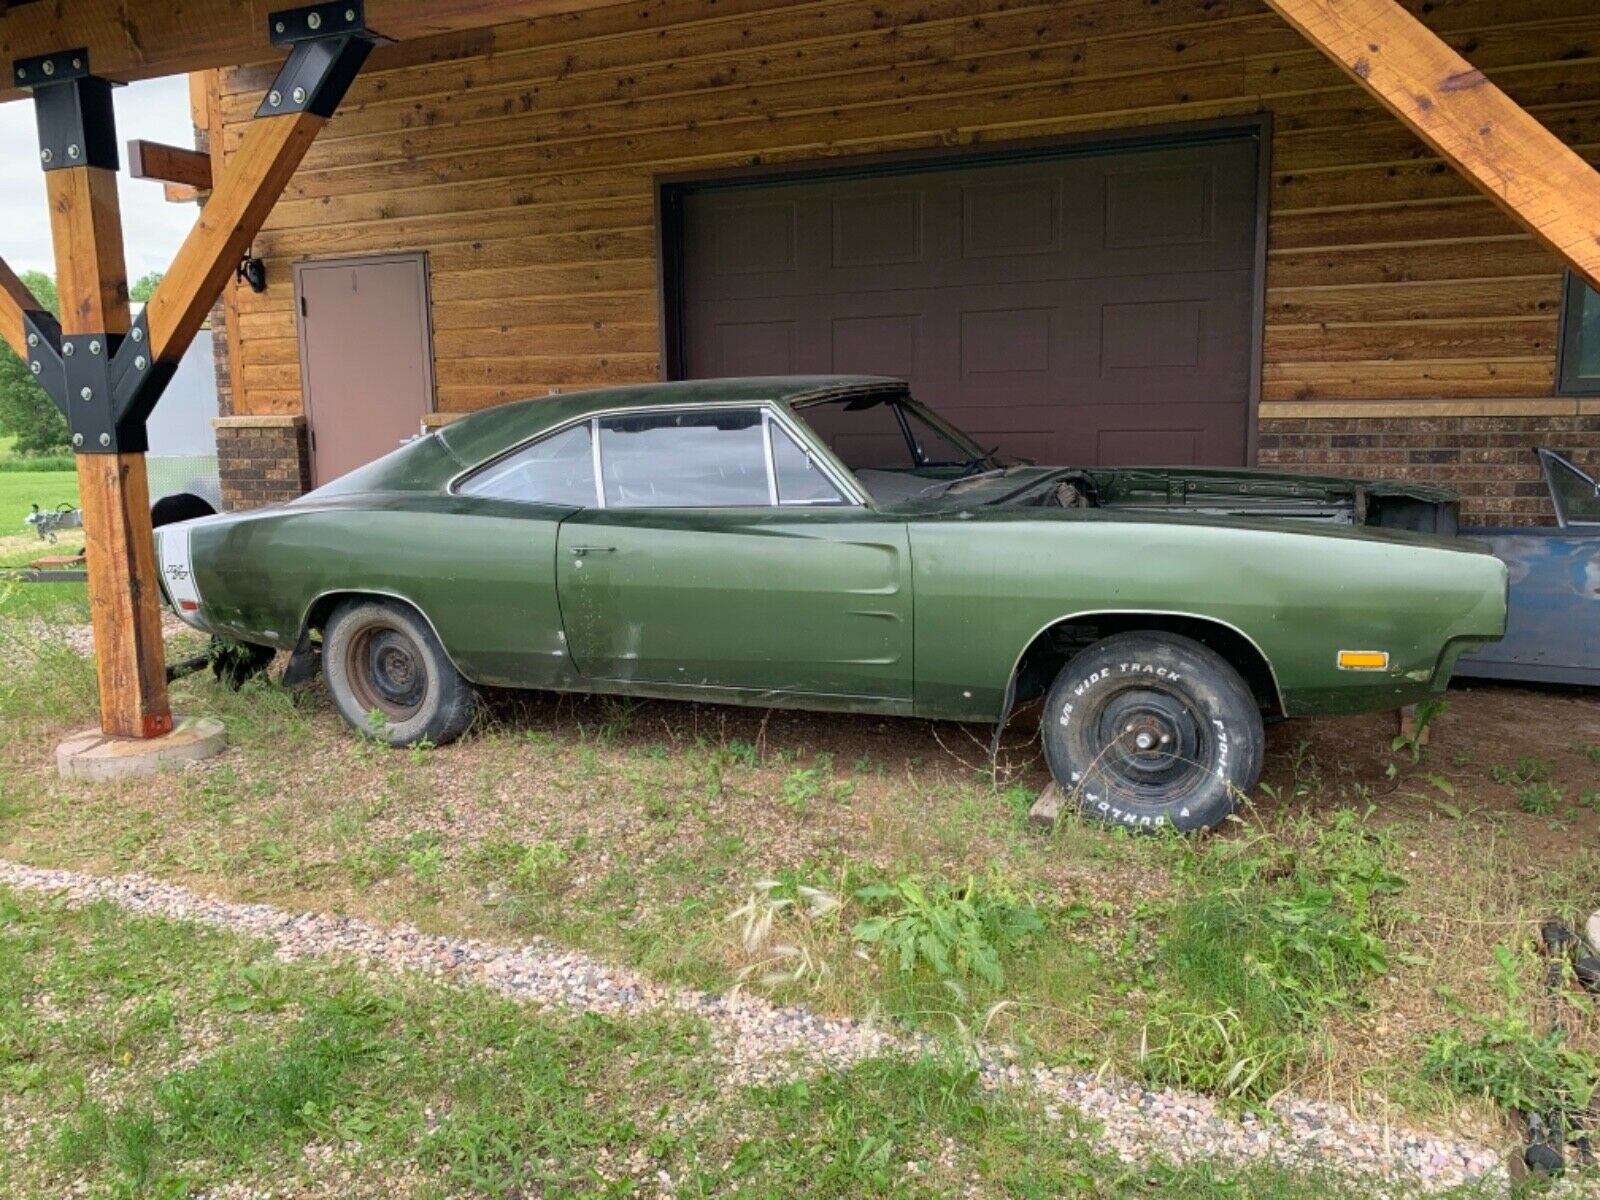 1969 Dodge Charger R/T Barn Find Is In Need of HEMI Muscle - autoevolution